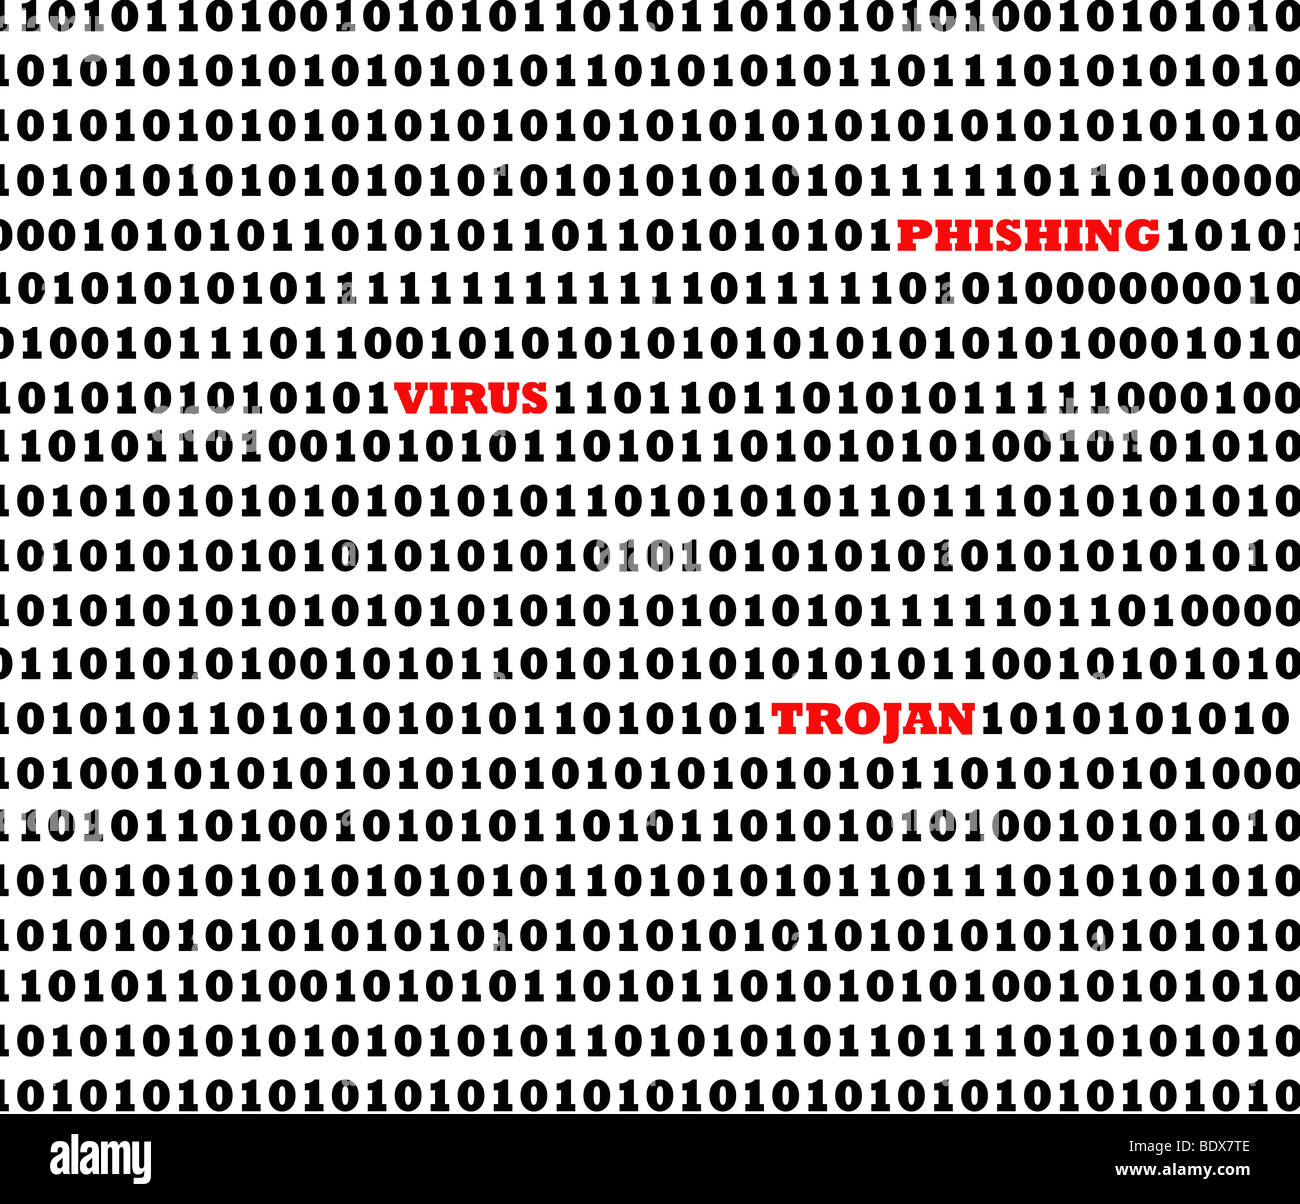 Computer virus masquerading as binary code, isolated on white background. Stock Photo